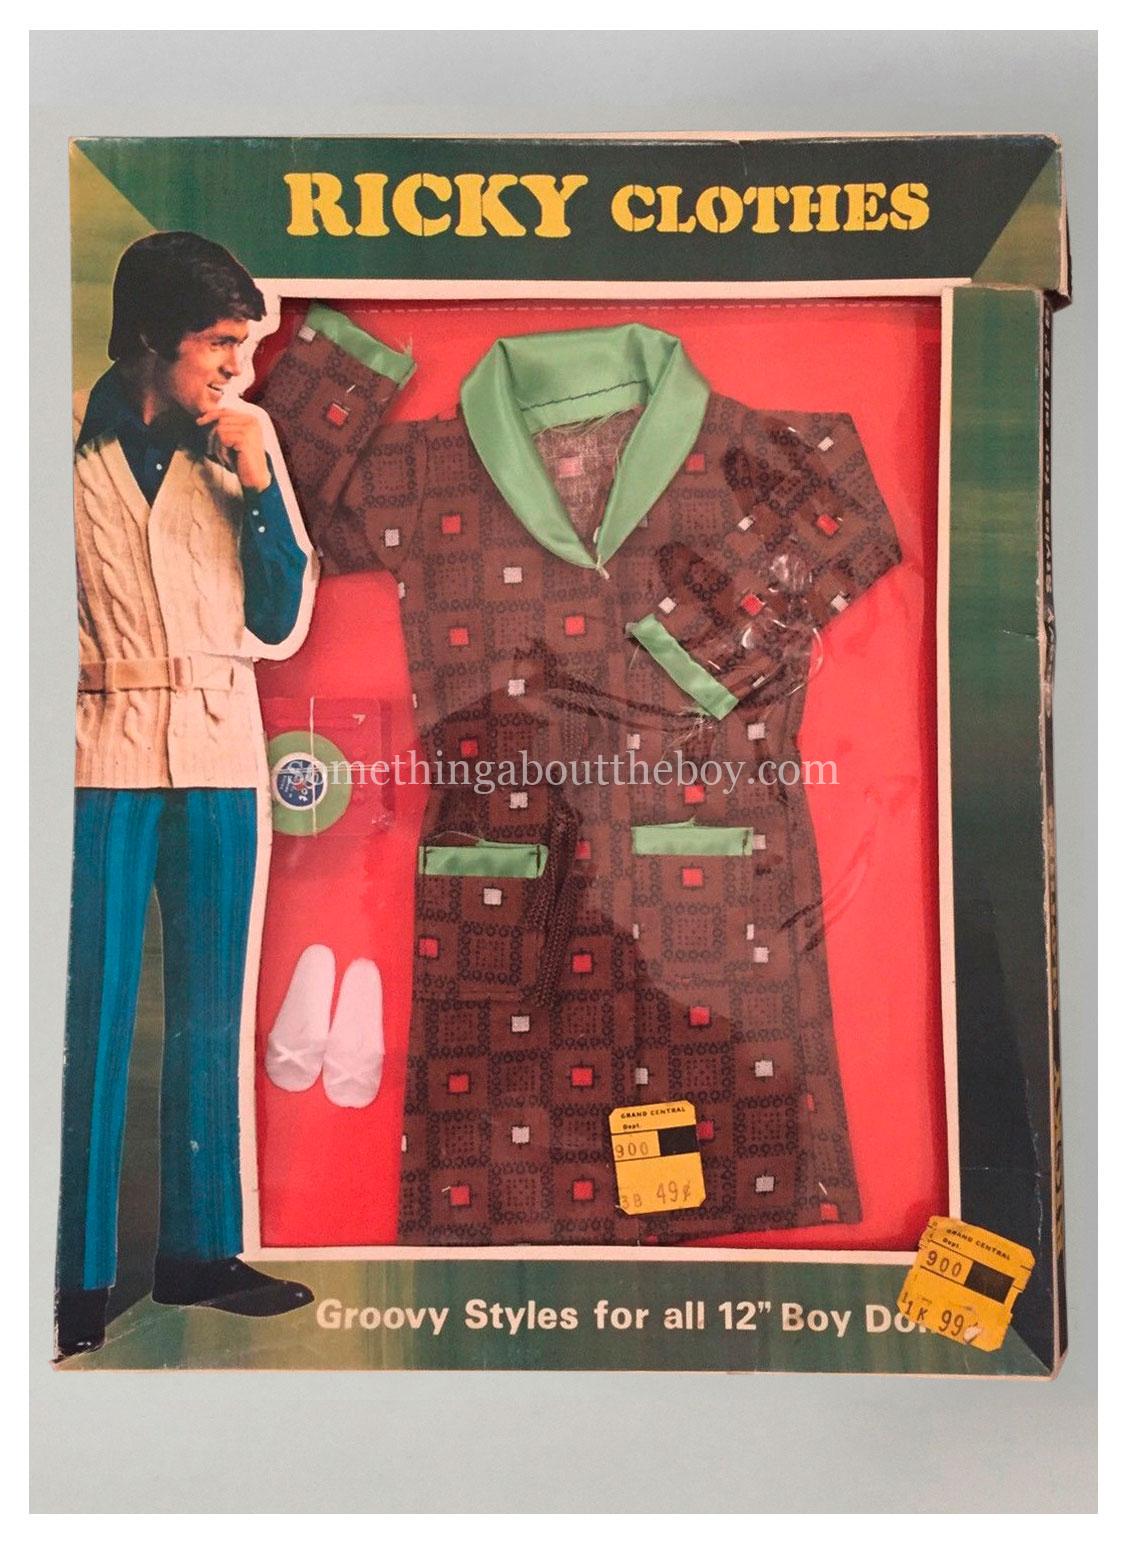 1970s Ricky Clothes in original packaging